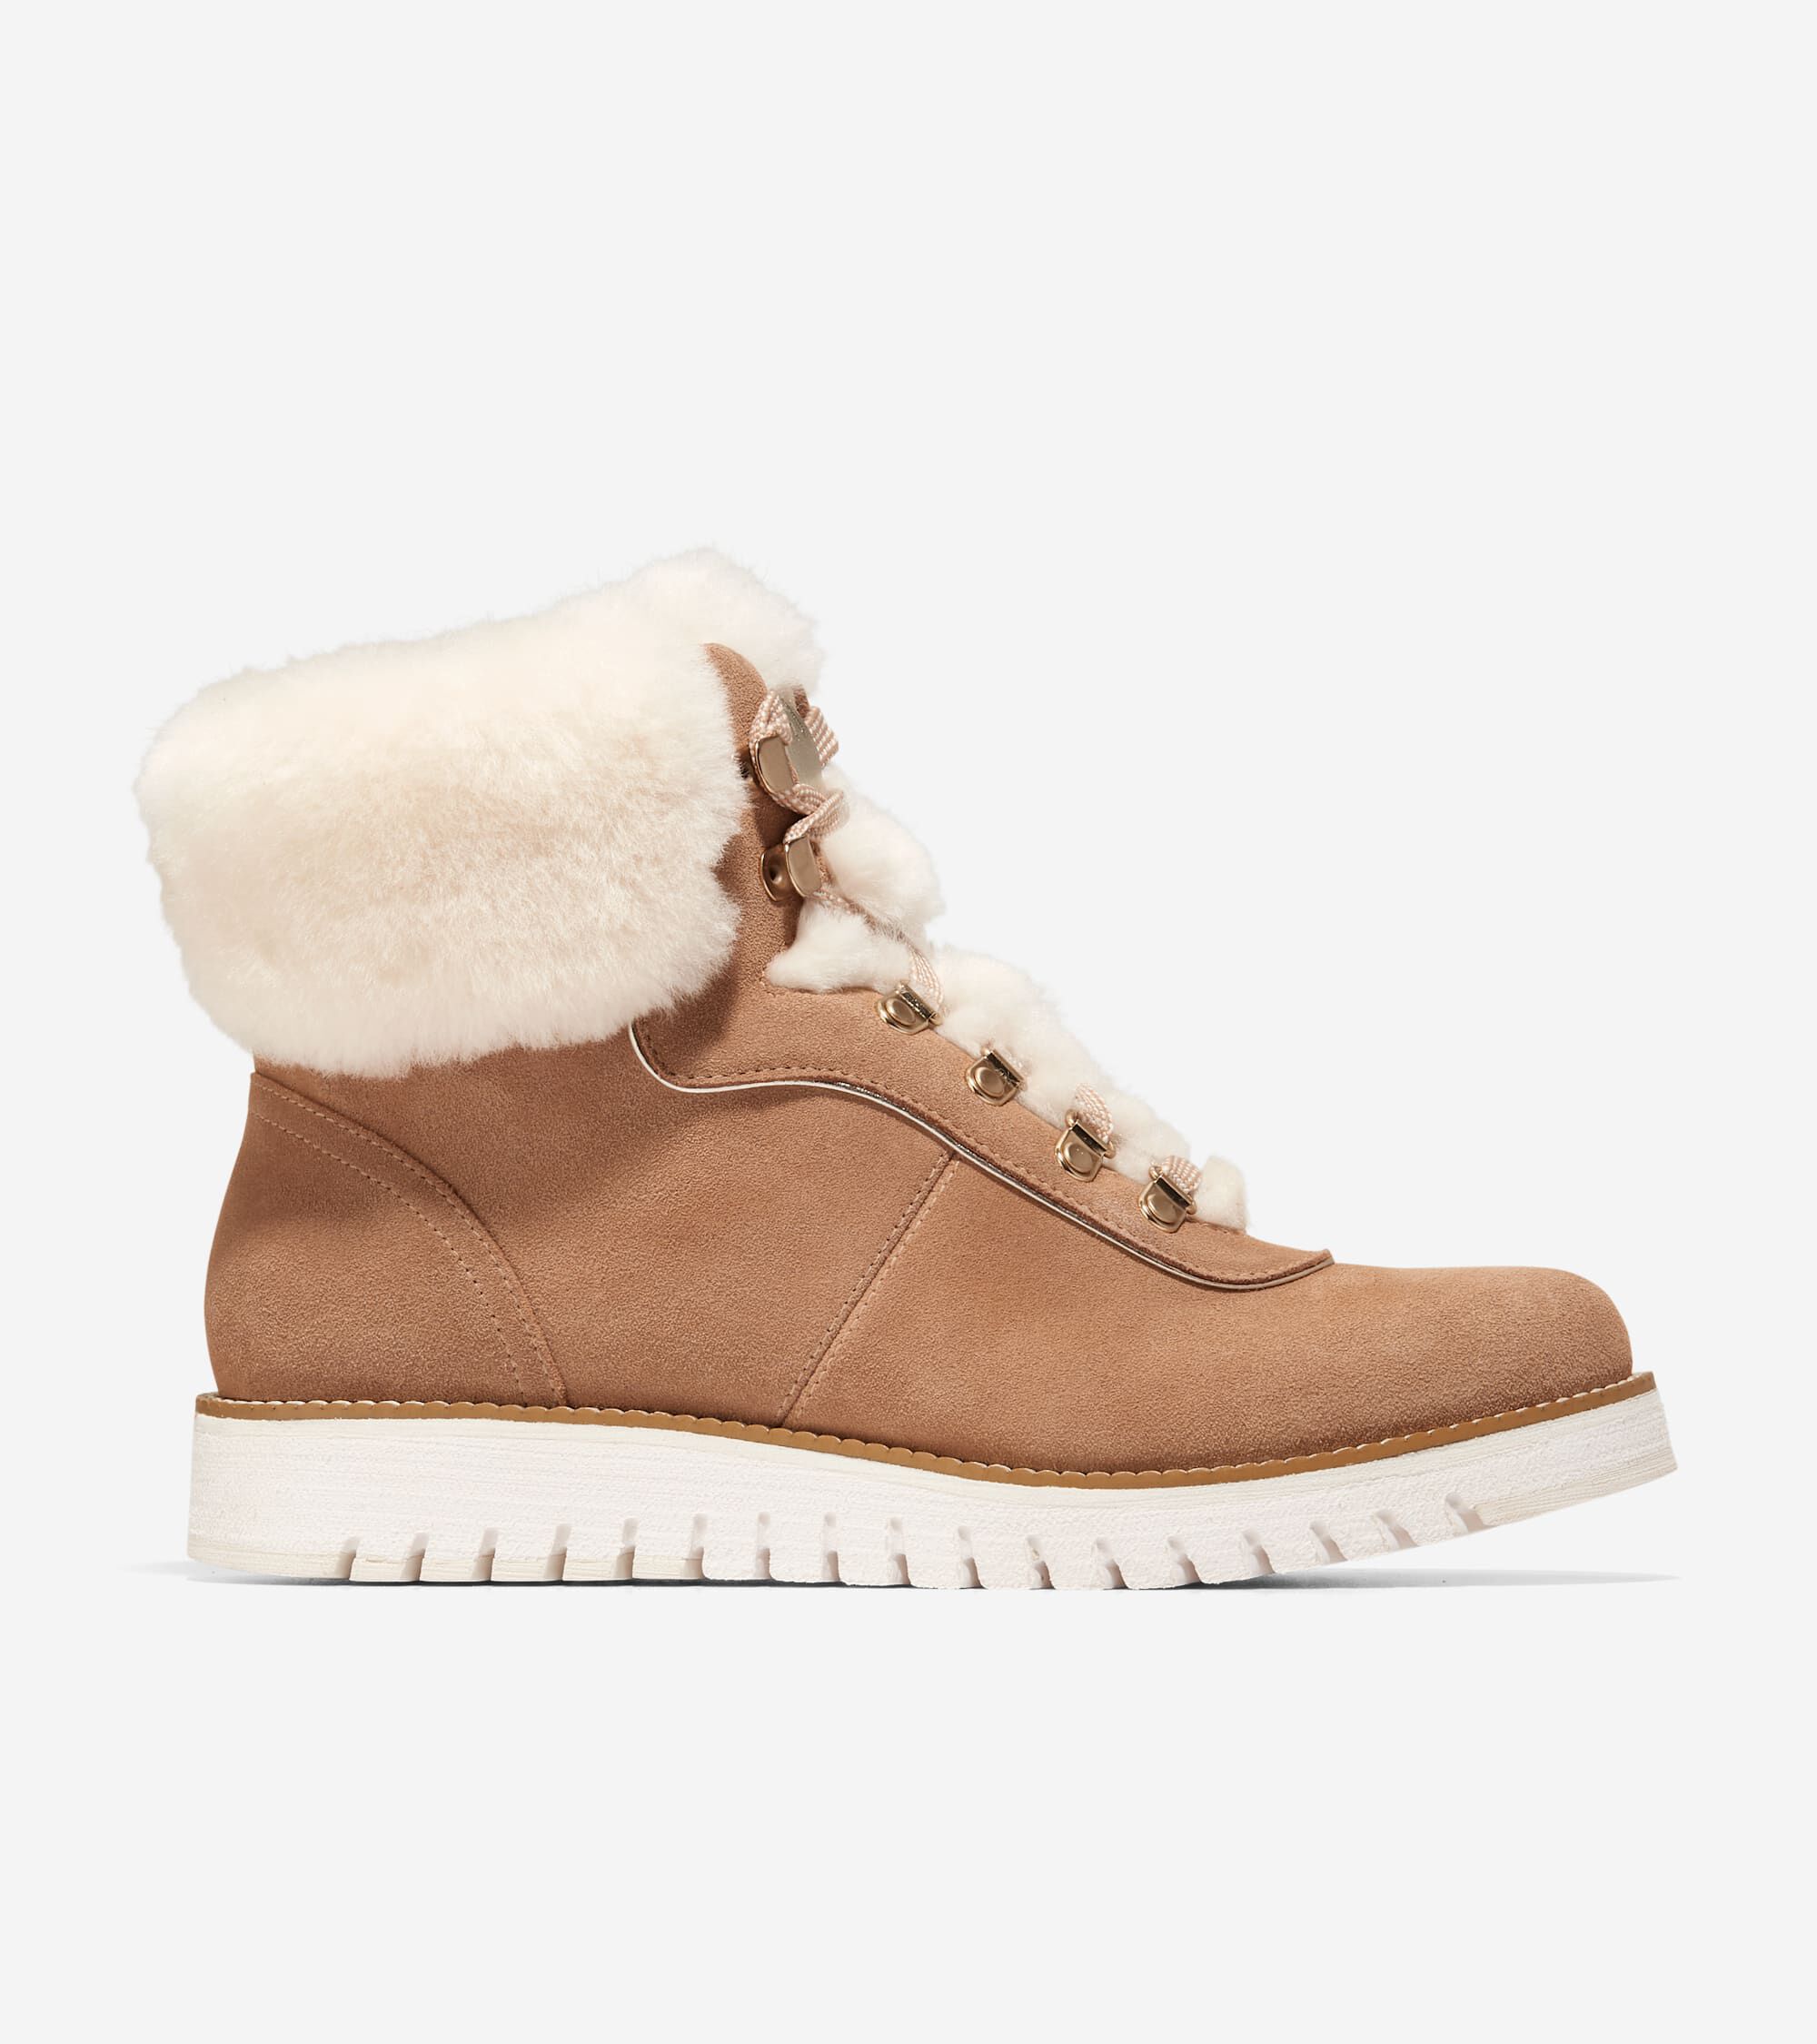 Women's Boots, Ankle Boots, and Booties | Cole Haan